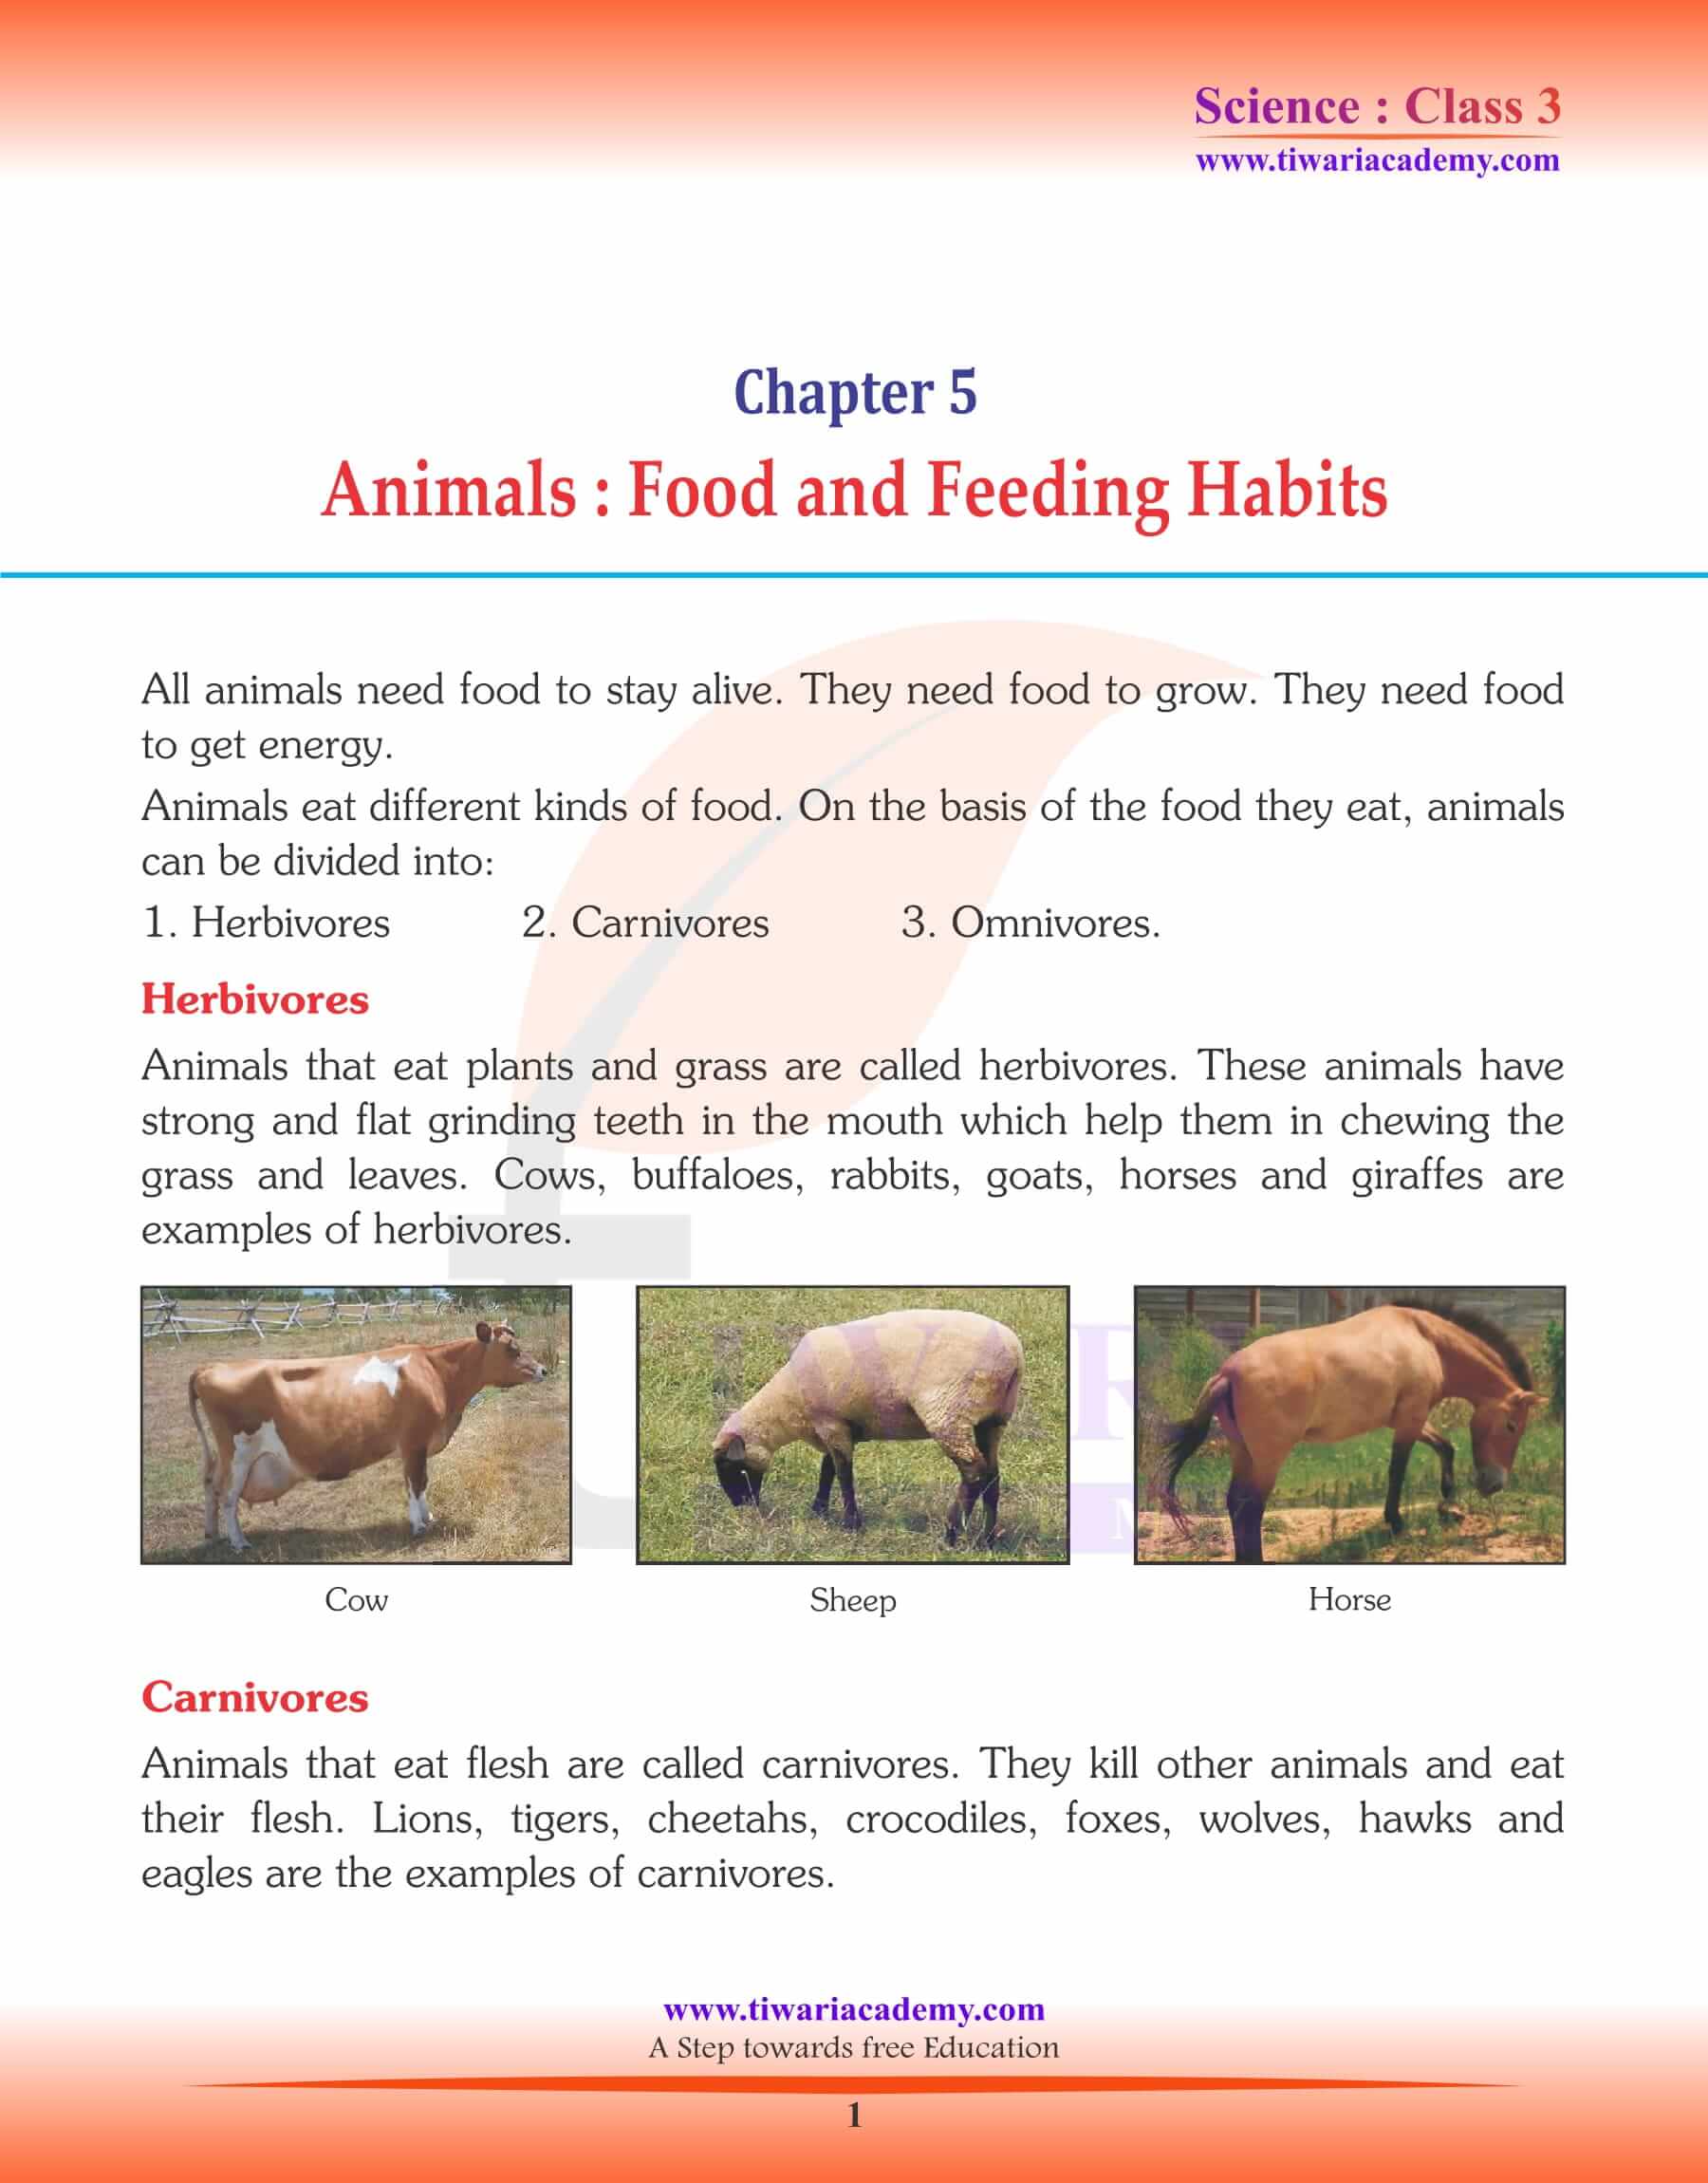 Class 3 Science Chapter 5 Animals - Food and Feeding Habits